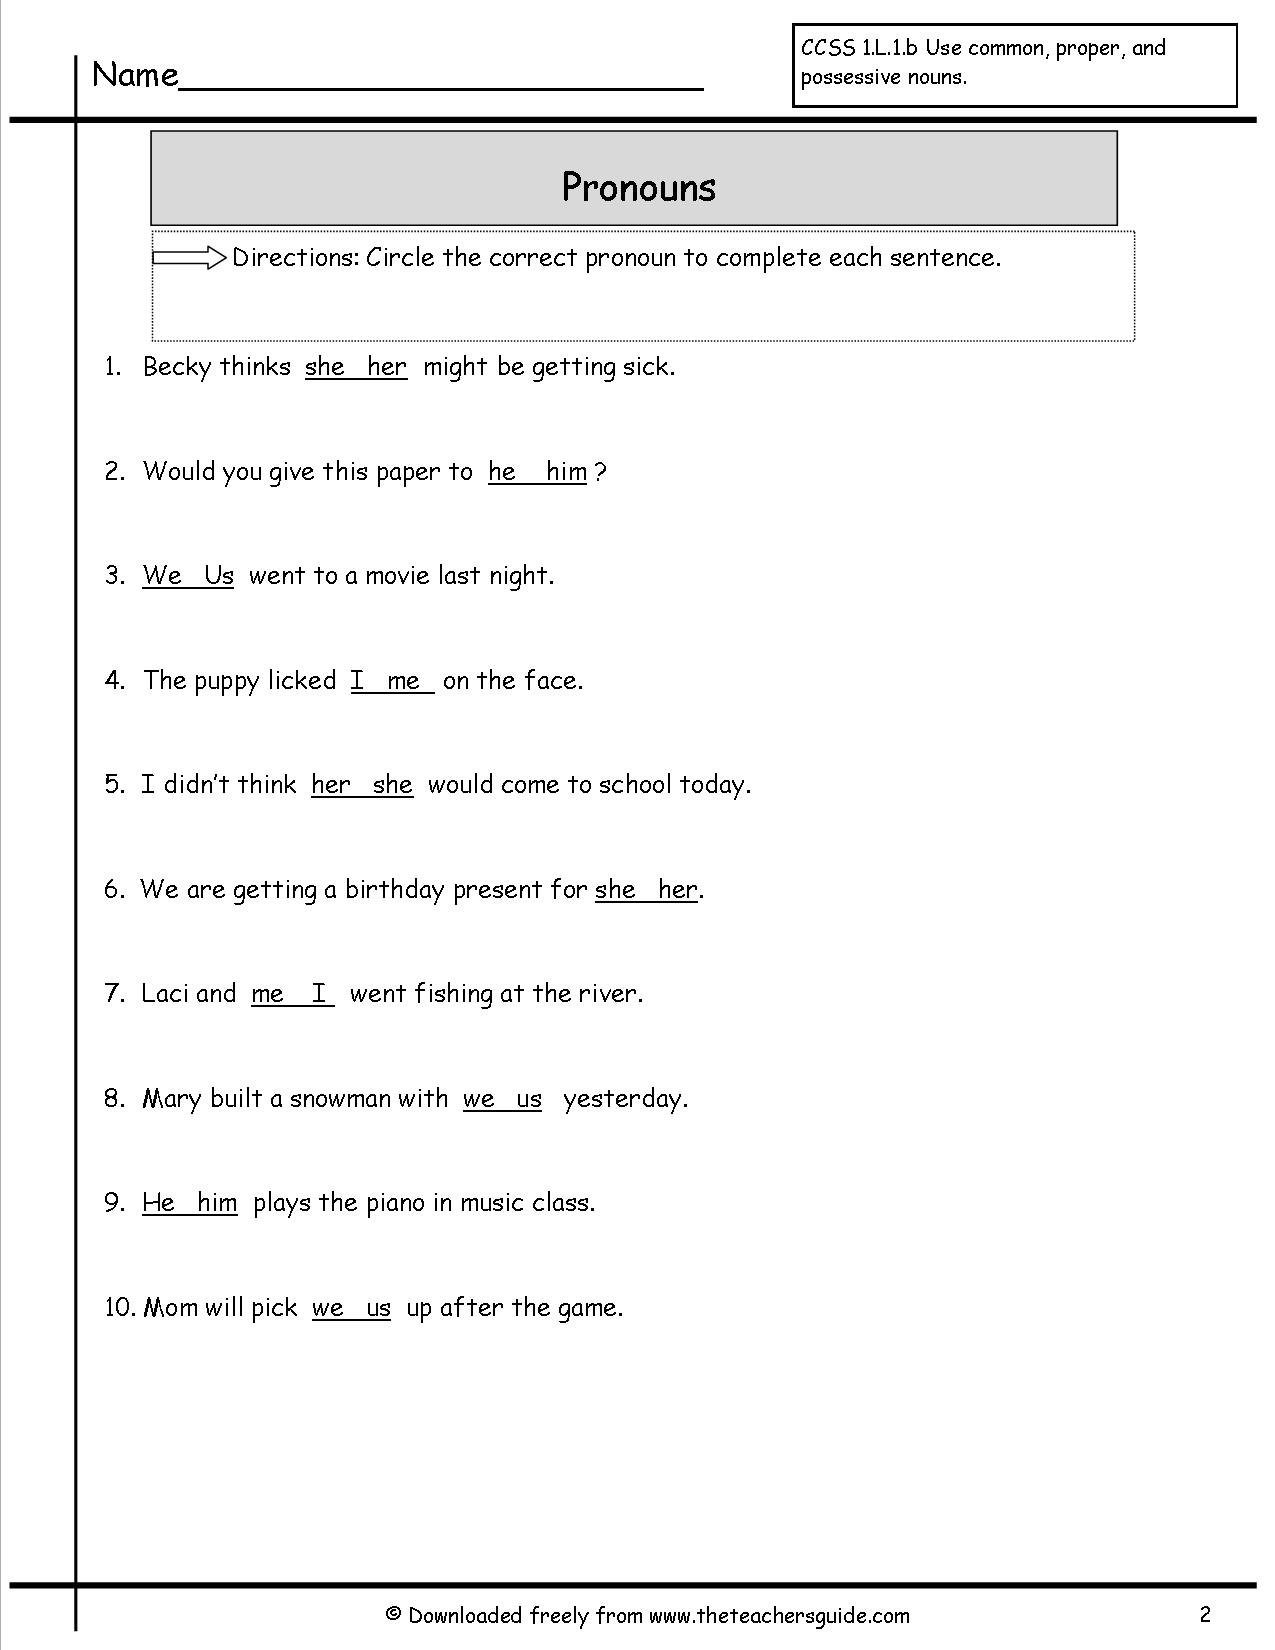 Pronouns Nouns Worksheets From The Teacher's Guide Within Nouns And Pronouns Worksheets